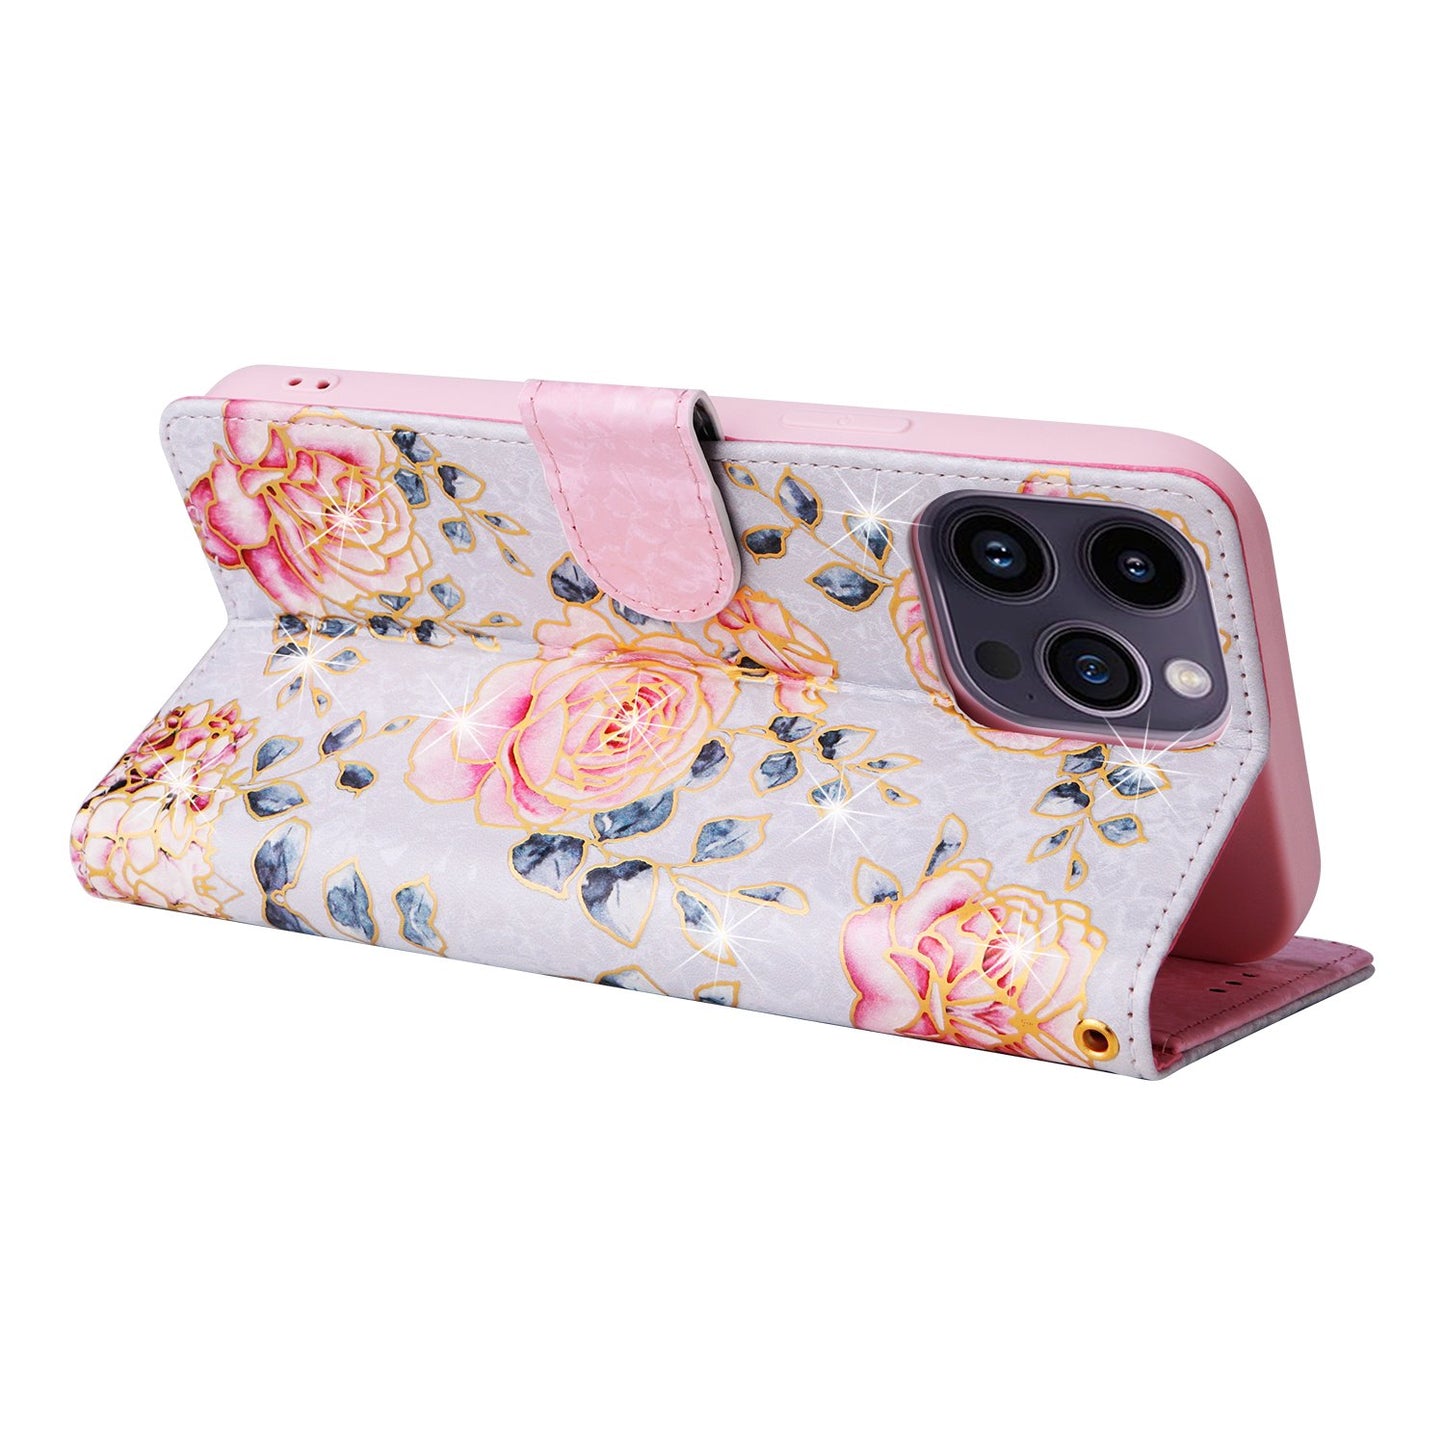 Flower Patterned Flip Leather Phone Case With FRID Anti-theft Function For Samsung Galaxy S23 S22 S21 S20 Ultra/S23 S22 S21 S20 Plus/S23 S22 S21 S20/S21 FE/S20 FE/S10 Plus/S10/S9 Plus/S9/S8 Plus/S8 Card Slots Holder Wallet Case